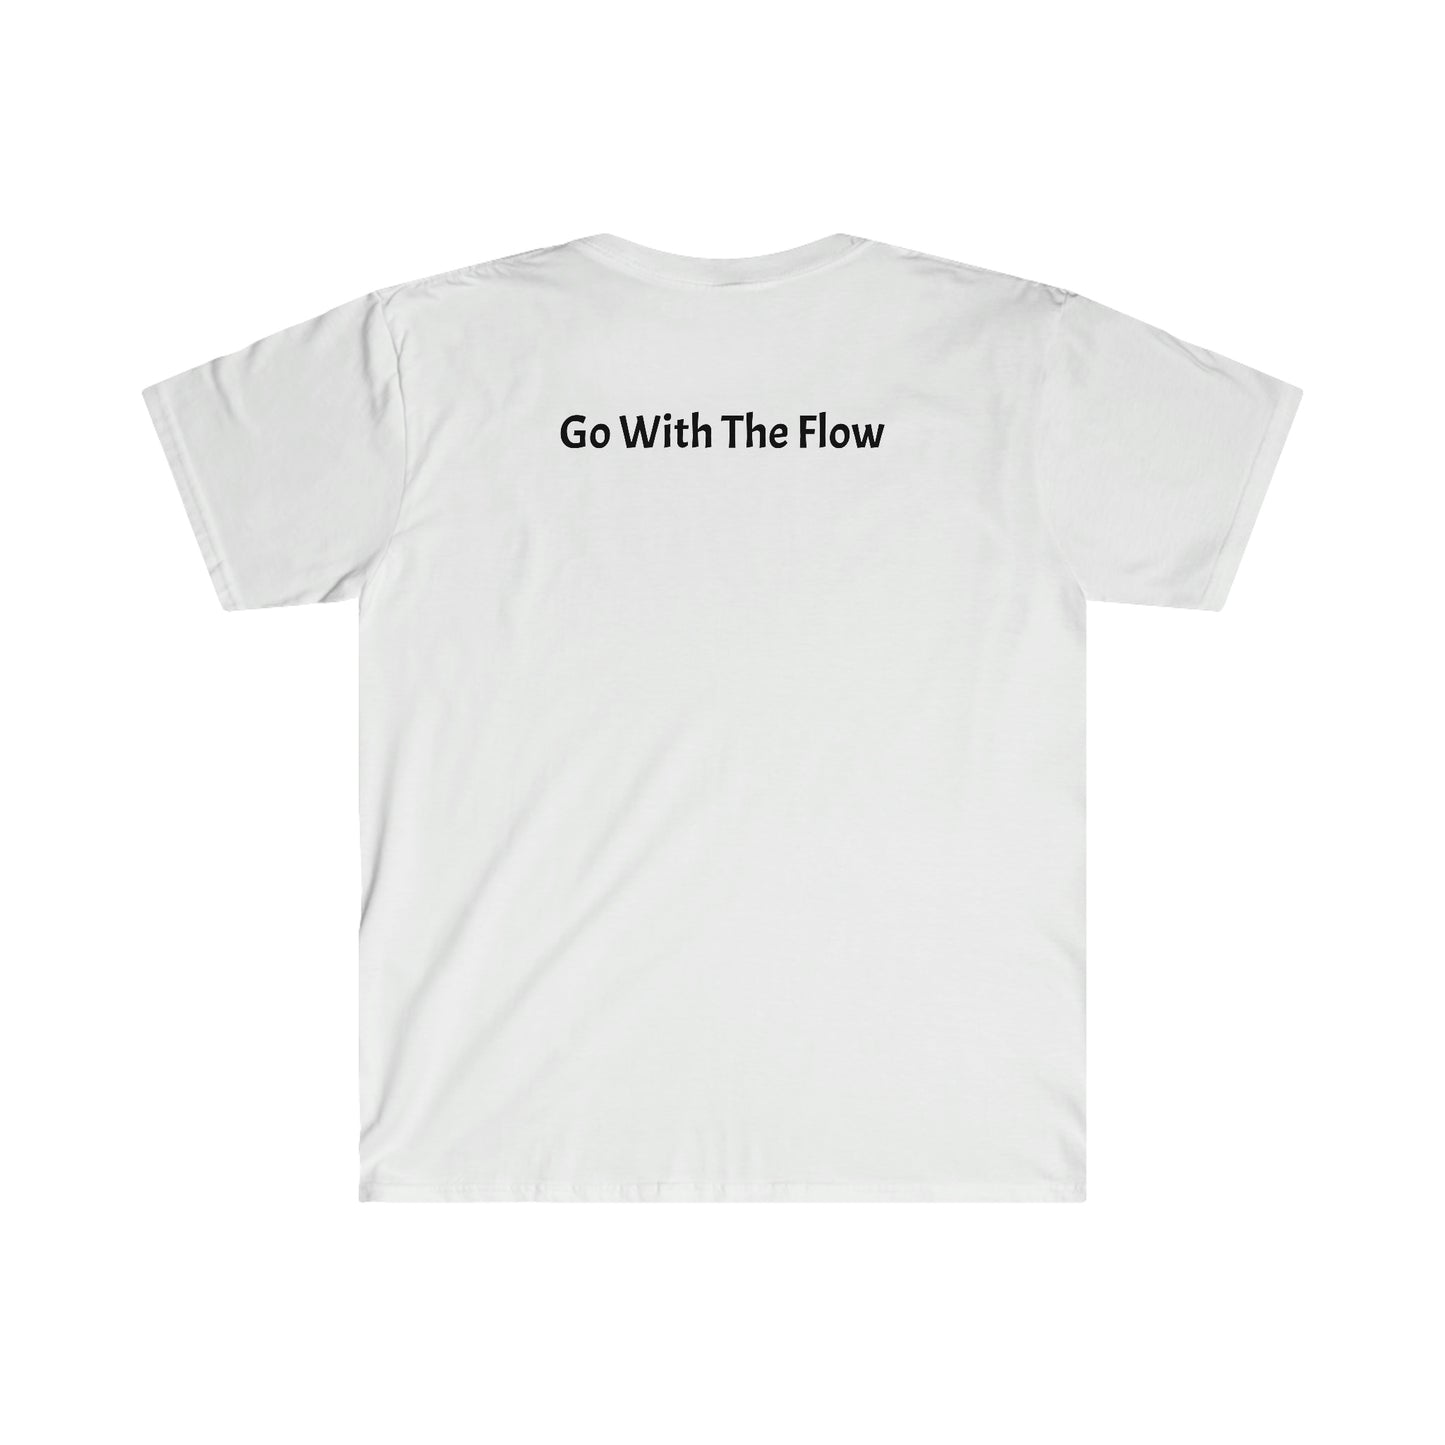 Berg T Time Adventures Go With The Flow Unisex Softstyle T-Shirt. Choose you color for your personal style and go adventure with it!